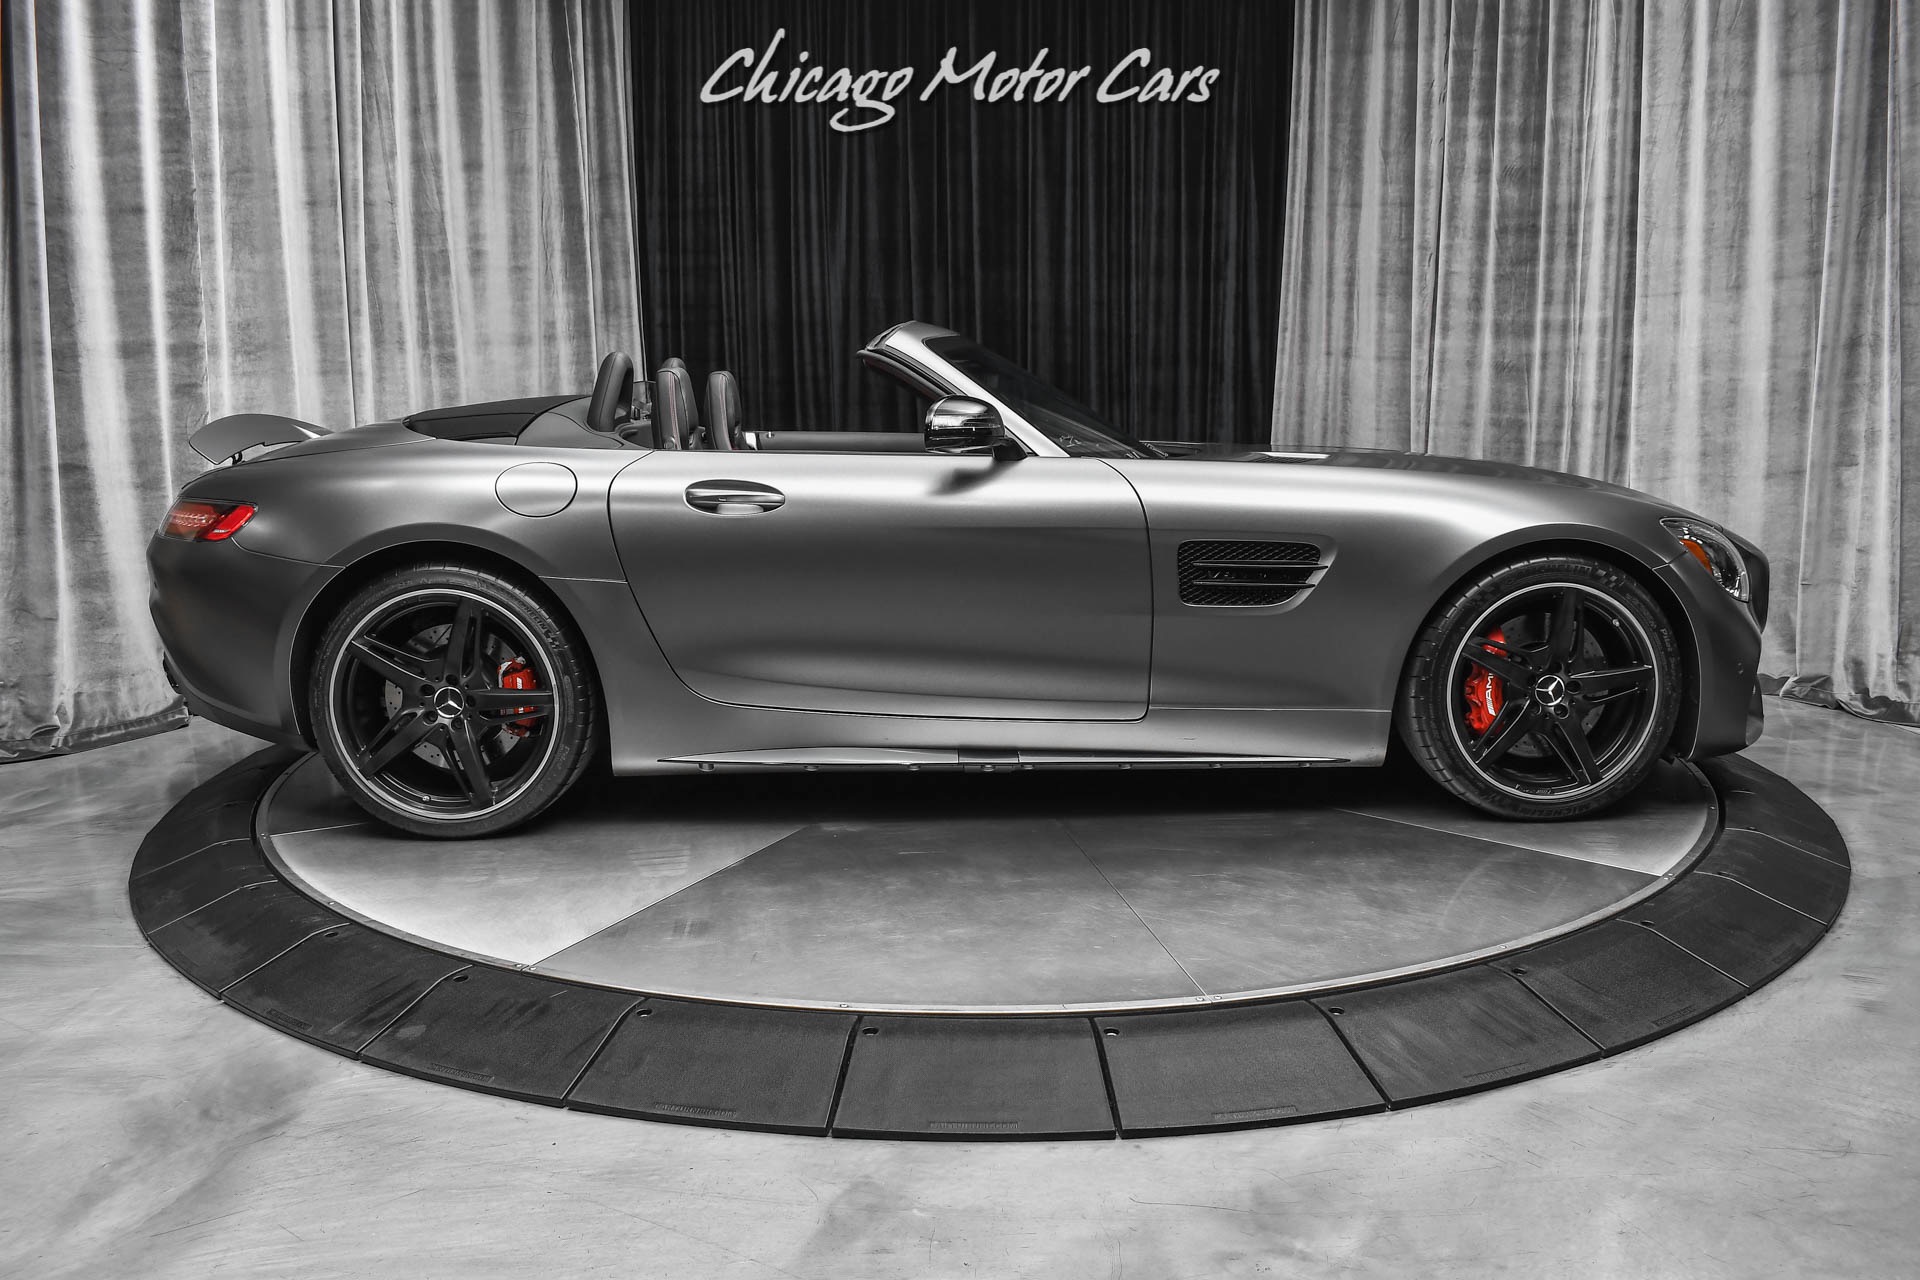 Used-2018-Mercedes-Benz-AMG-GT-ROADSTER-Convertible-8k-Miles-Hot-Spec-Exclusive-Interior-Pack-LOADED